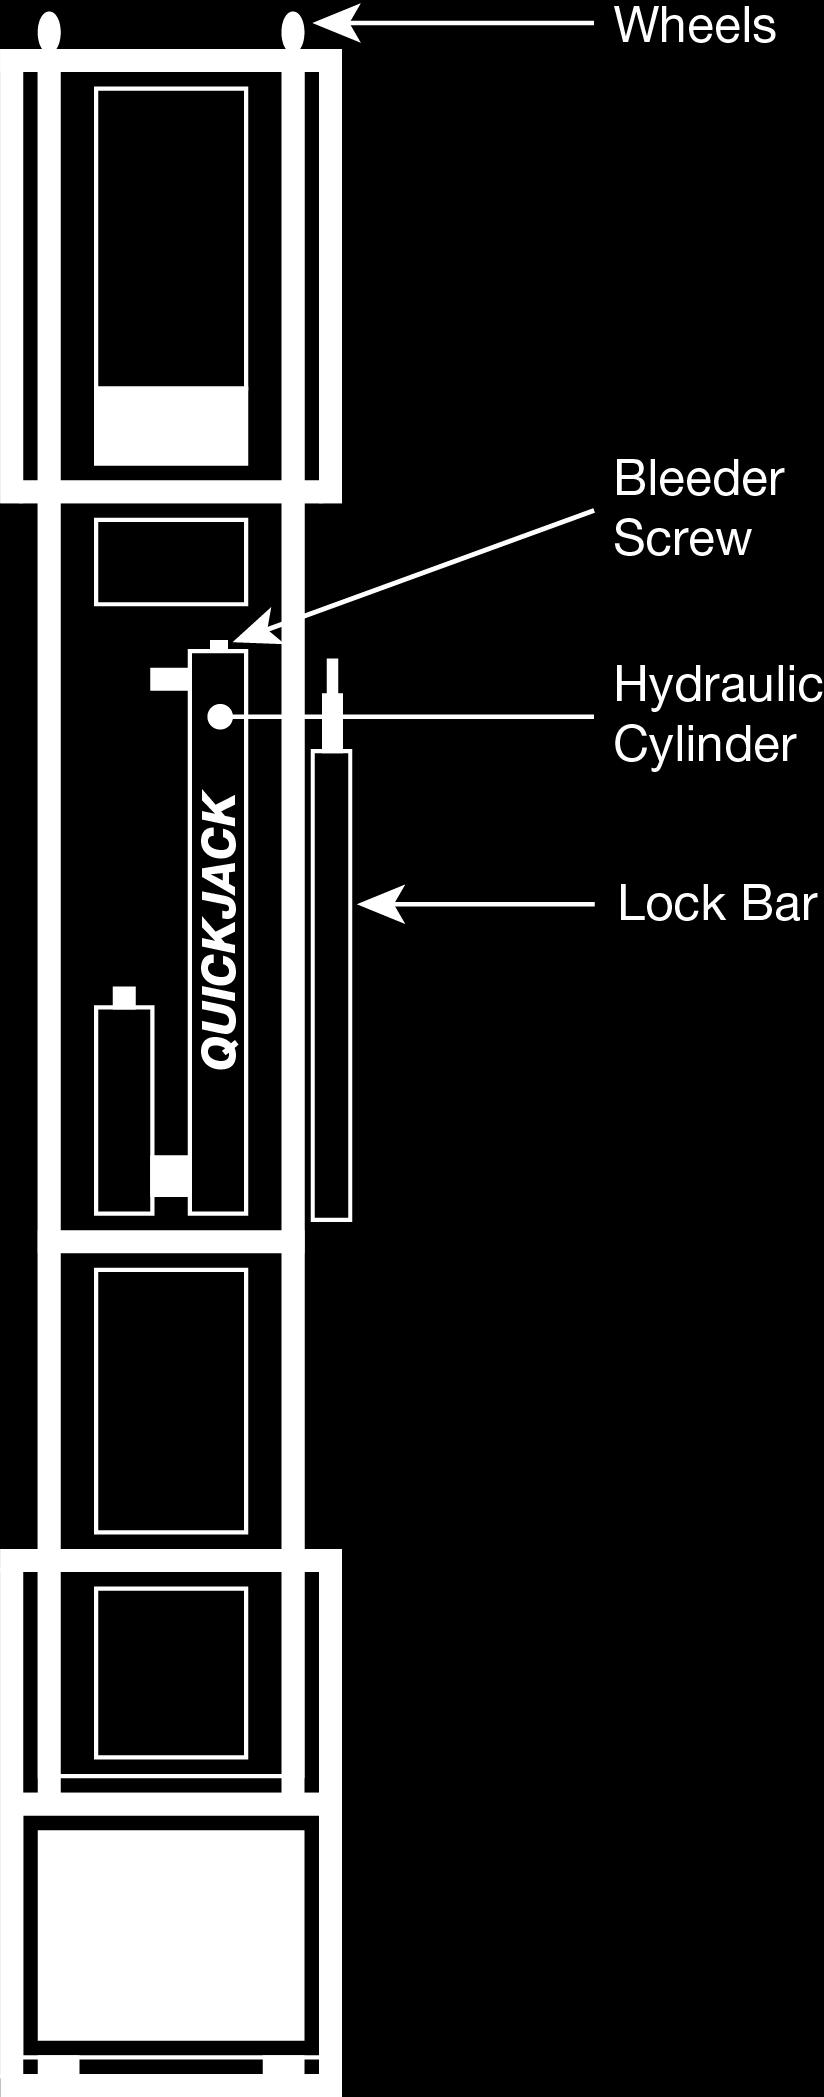 Bleed the Hydraulic Cylinders Bleeding the Hydraulic Cylinders removes excess air pressure and fluid from the cylinders.